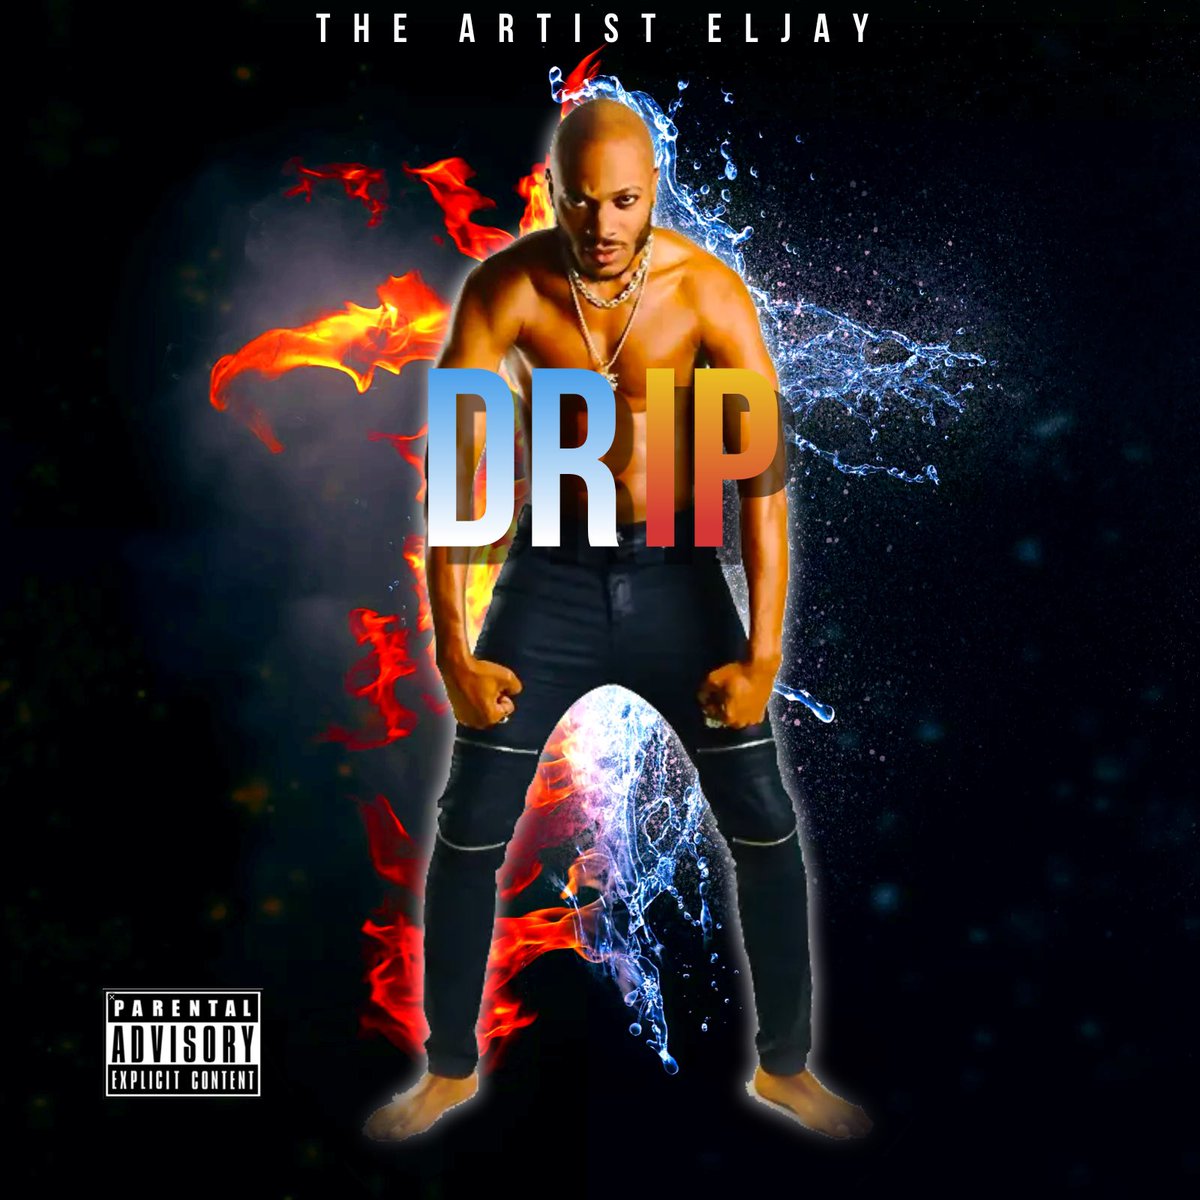 Make sure “Drip” is in your weekend rotation 🎶🕺🏽

Download NOW!!! distrokid.com/hyperfollow/th…

#theartisteljayone #theartisteljay #Drip #DripChallengeAudition #GrammyConsidered #Singer #songwriter #performer #actor #dancer #Model #Philanthropist #NewMusic #downloadnow #Booking